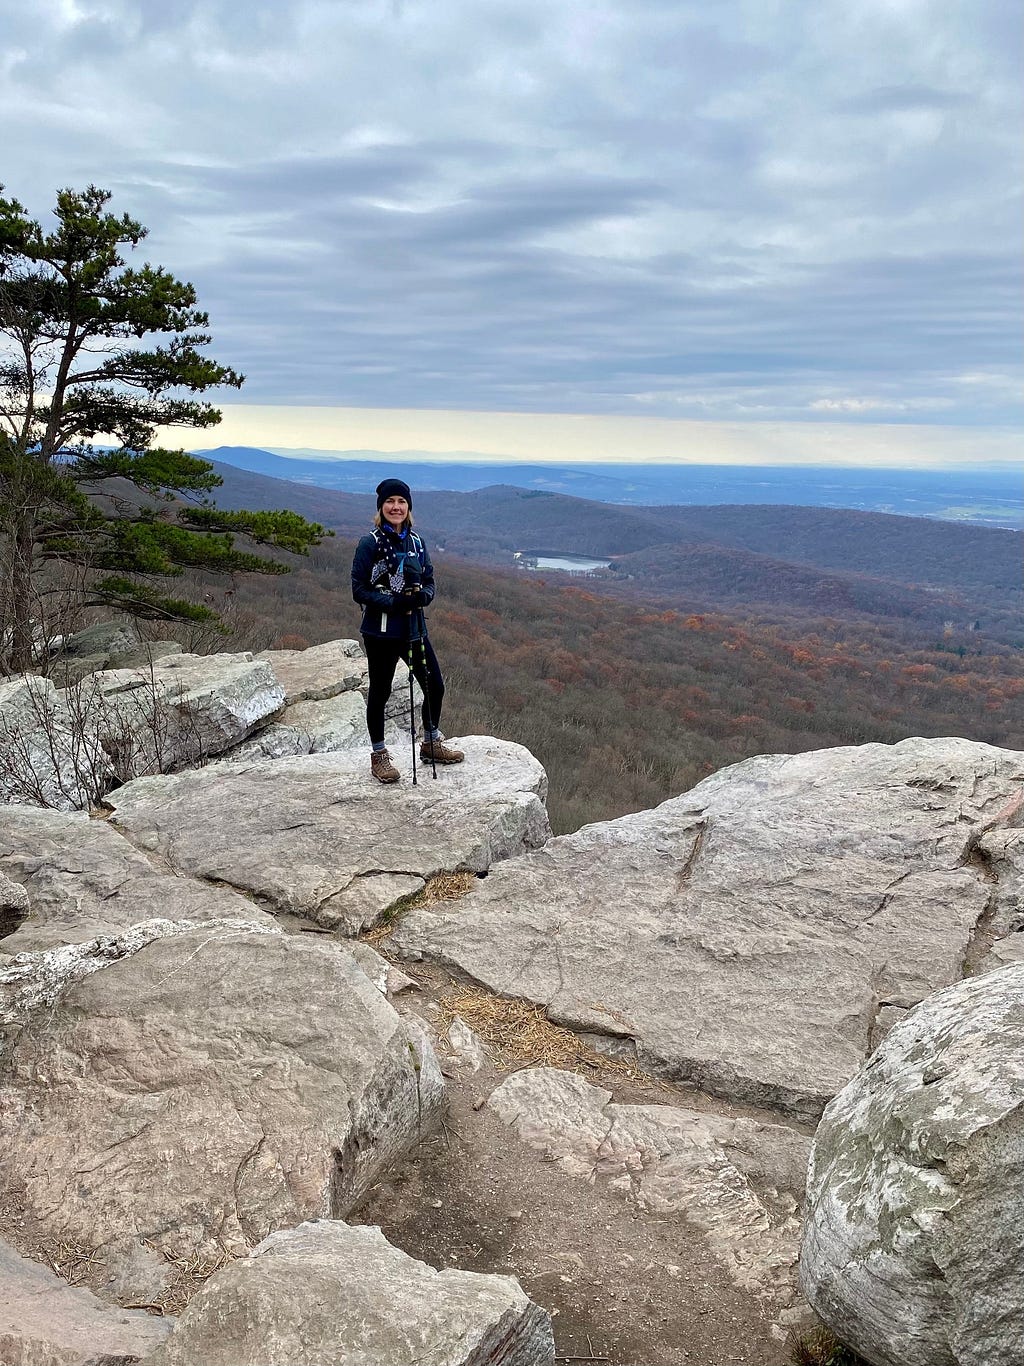 Michelle Smith, artist, photographer and Instructional Designer for the National Conservation Training Center is out on a nice hike at Annapolis Rock, Maryland.